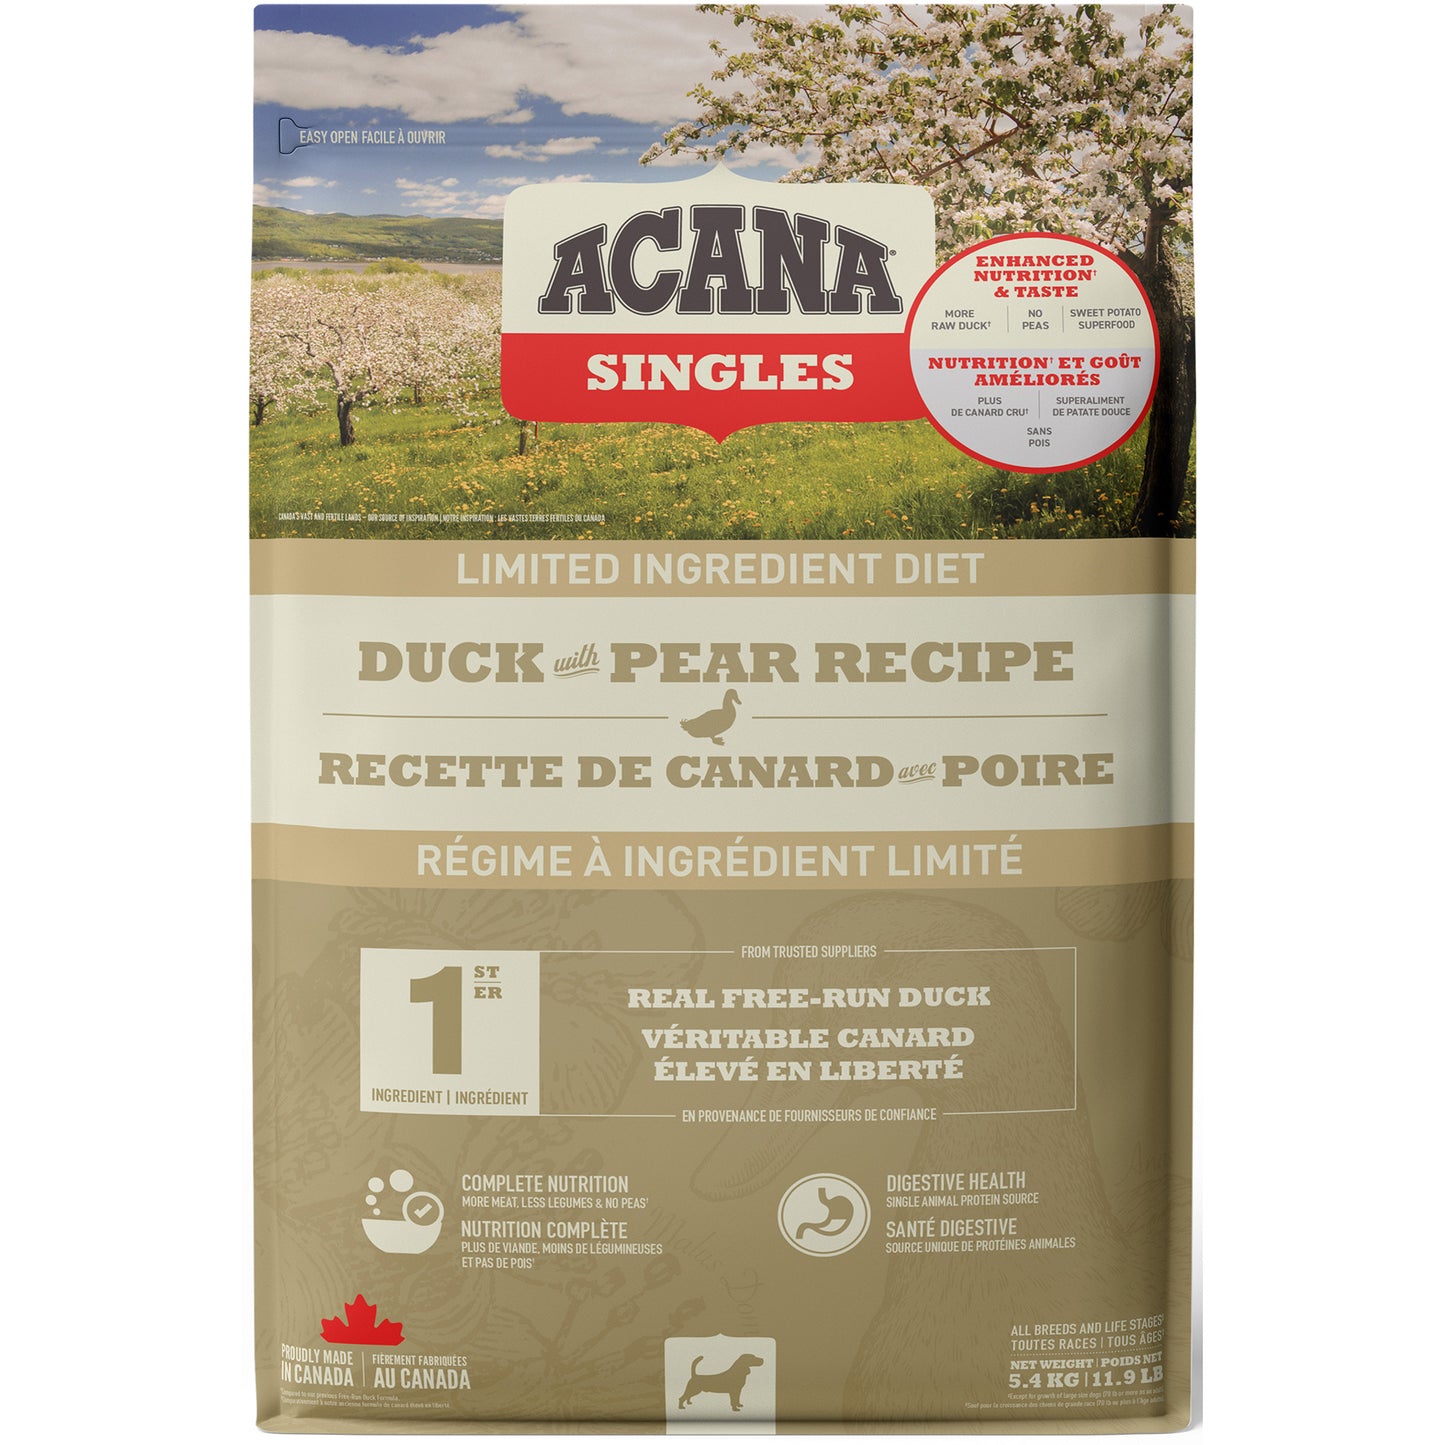 ACANA® SINGLES Duck with Pear Recipe